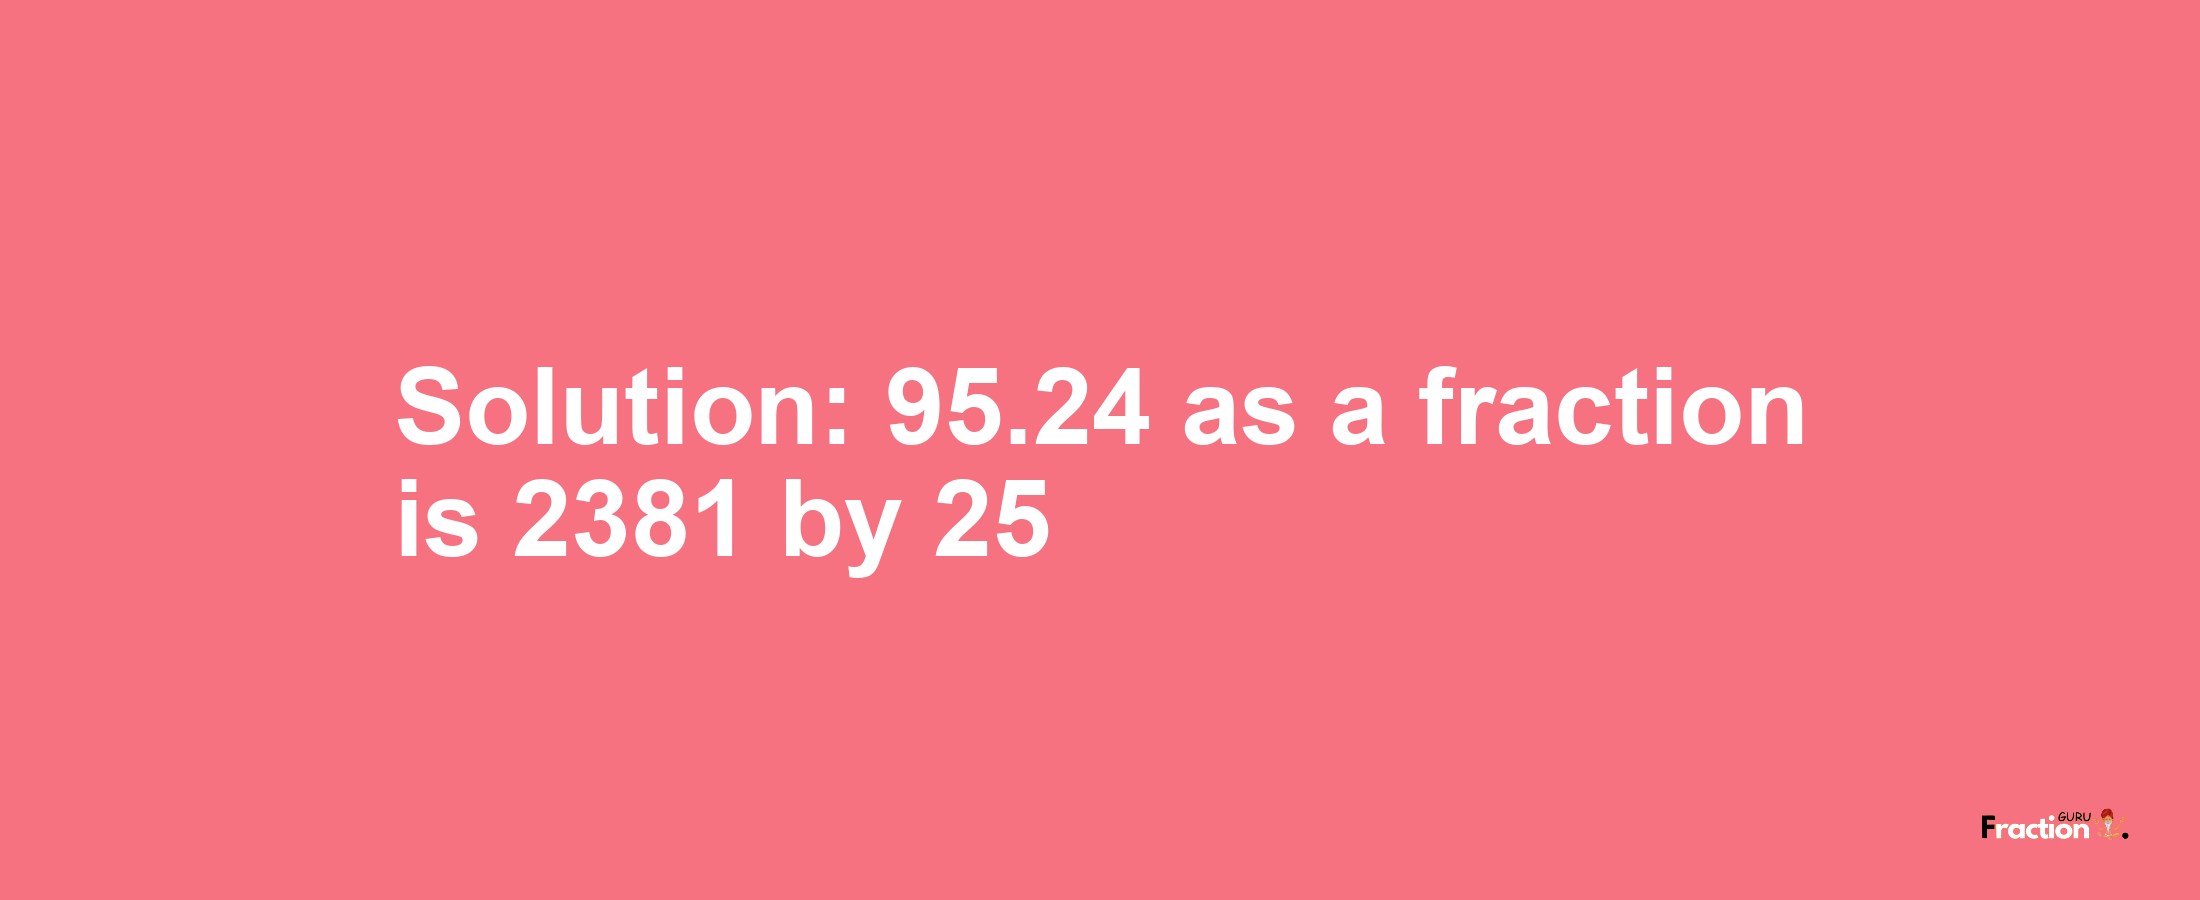 Solution:95.24 as a fraction is 2381/25